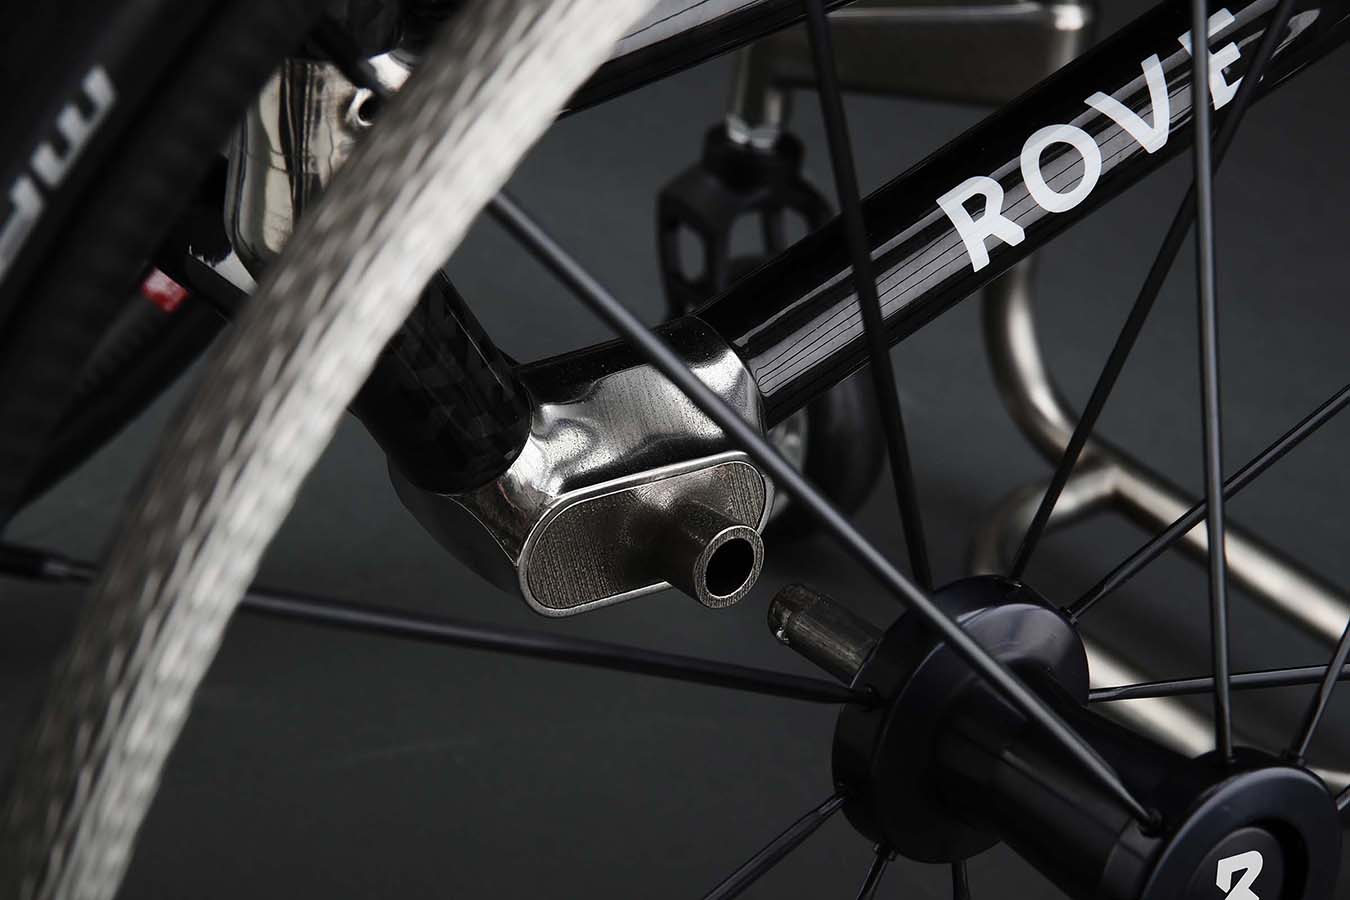 A detail image of Rove Wheelchair patented 'FlipChip' axle adjustment feature.